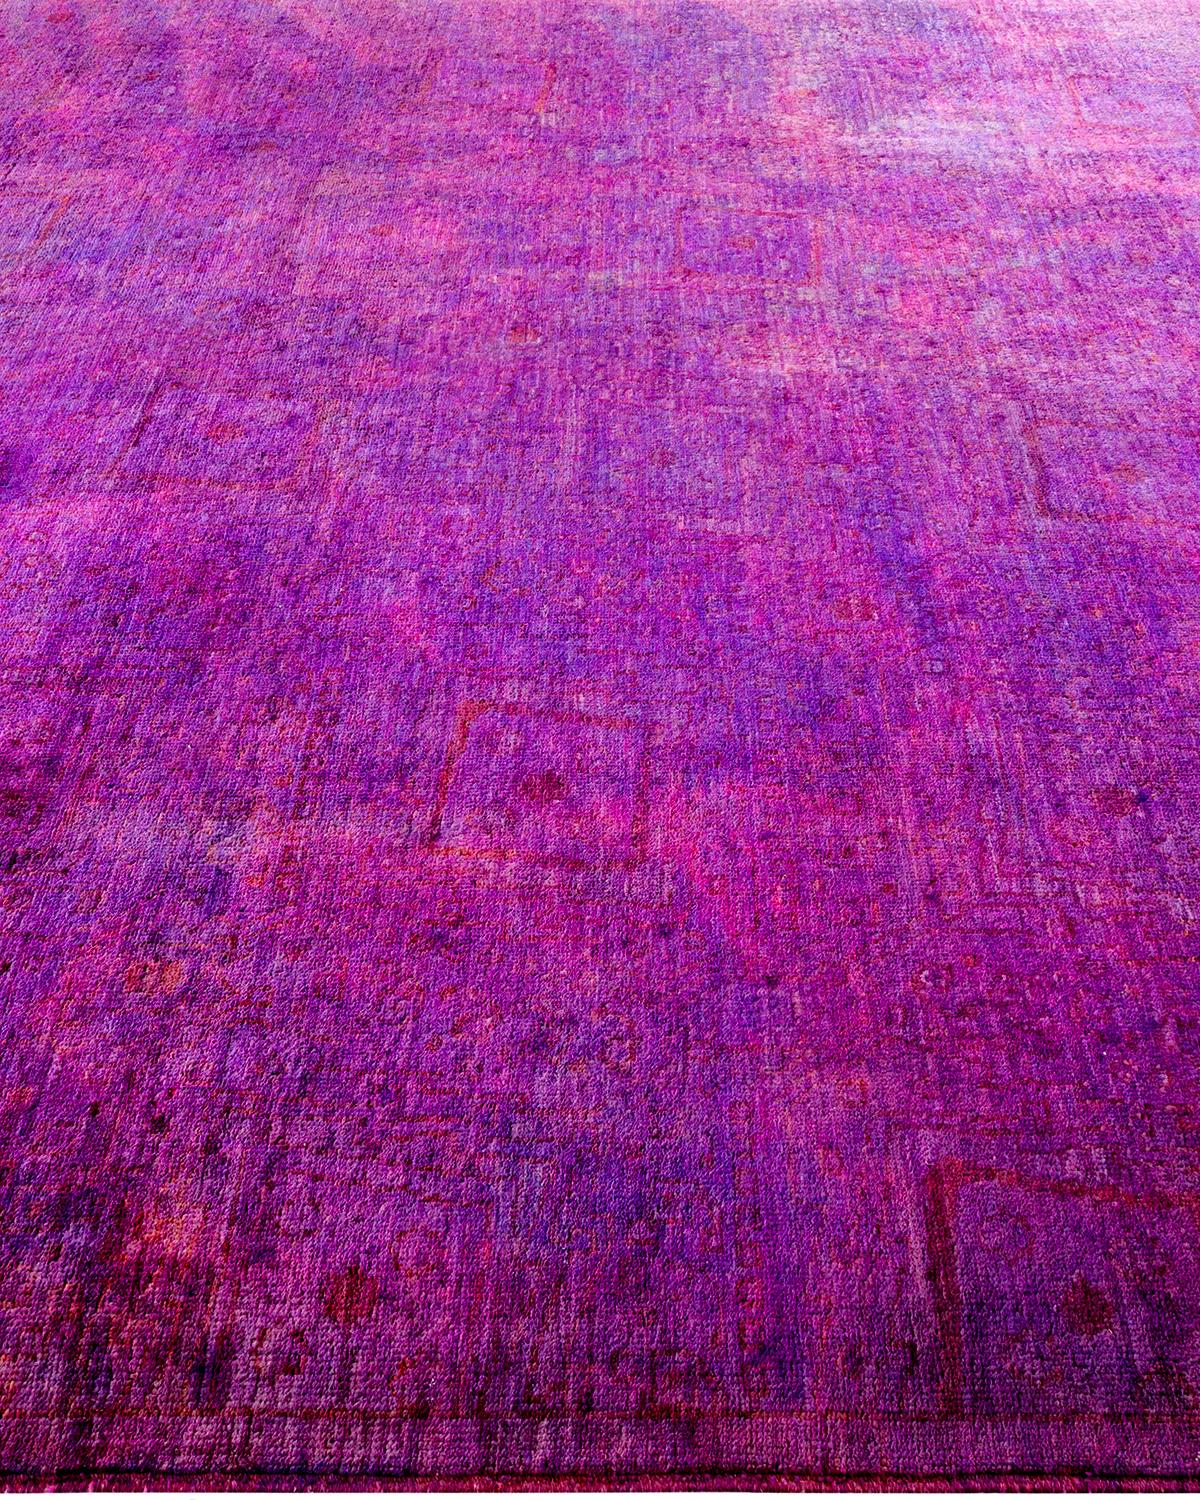 Overdyed Hand Knotted Wool Purple Area Rug In New Condition For Sale In Norwalk, CT